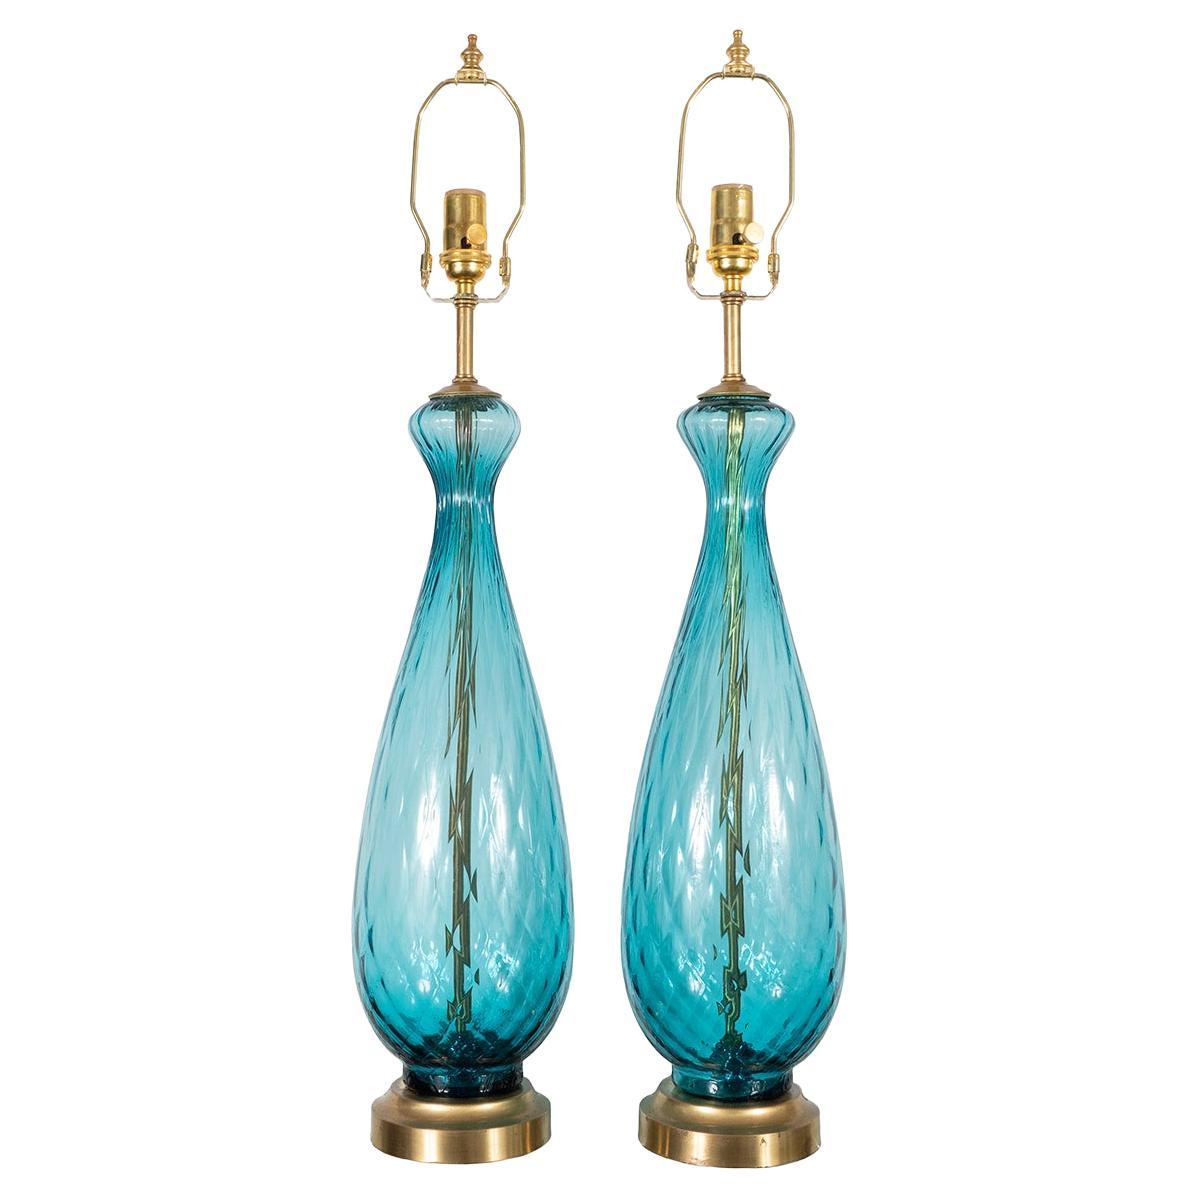 Pair of Pale Blue Murano Glass Lamps